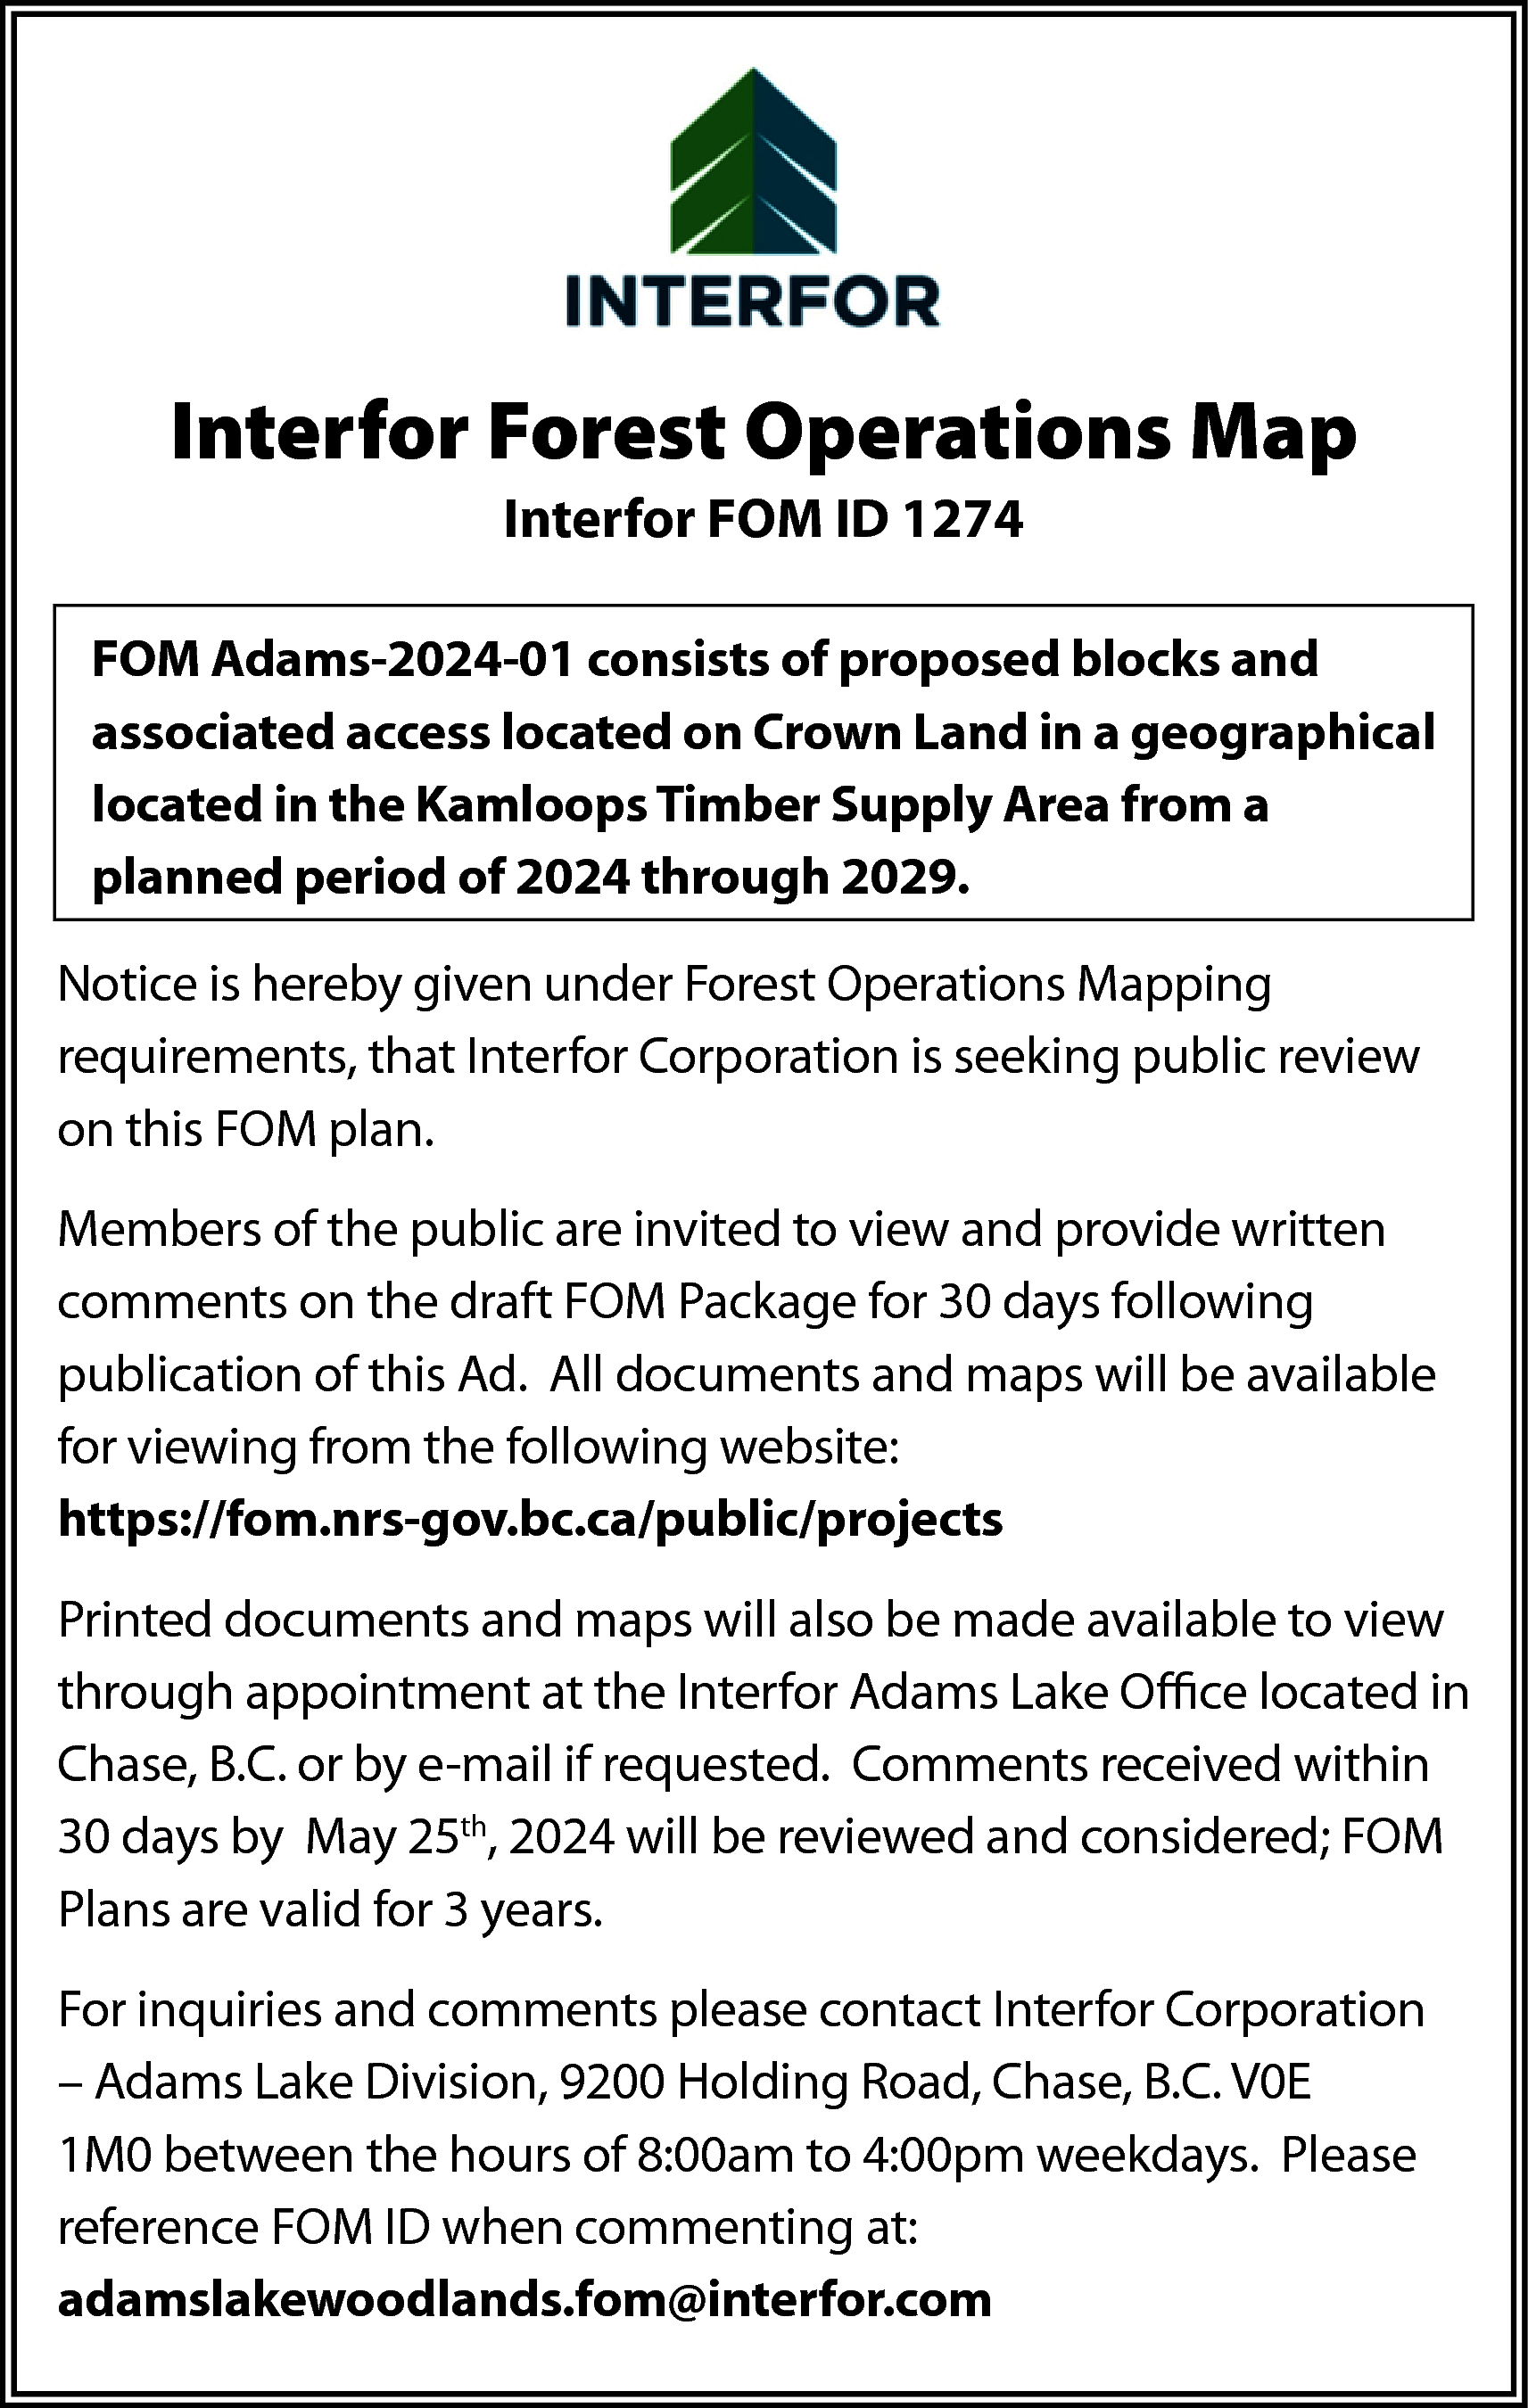 Interfor Forest Operations Map <br>Interfor  Interfor Forest Operations Map  Interfor FOM ID 1274  FOM Adams-2024-01 consists of proposed blocks and  associated access located on Crown Land in a geographical  located in the Kamloops Timber Supply Area from a  planned period of 2024 through 2029.  Notice is hereby given under Forest Operations Mapping  requirements, that Interfor Corporation is seeking public review  on this FOM plan.  Members of the public are invited to view and provide written  comments on the draft FOM Package for 30 days following  publication of this Ad. All documents and maps will be available  for viewing from the following website:  https://fom.nrs-gov.bc.ca/public/projects  Printed documents and maps will also be made available to view  through appointment at the Interfor Adams Lake Office located in  Chase, B.C. or by e-mail if requested. Comments received within  30 days by May 25th, 2024 will be reviewed and considered; FOM  Plans are valid for 3 years.  For inquiries and comments please contact Interfor Corporation  – Adams Lake Division, 9200 Holding Road, Chase, B.C. V0E  1M0 between the hours of 8:00am to 4:00pm weekdays. Please  reference FOM ID when commenting at:  adamslakewoodlands.fom@interfor.com    